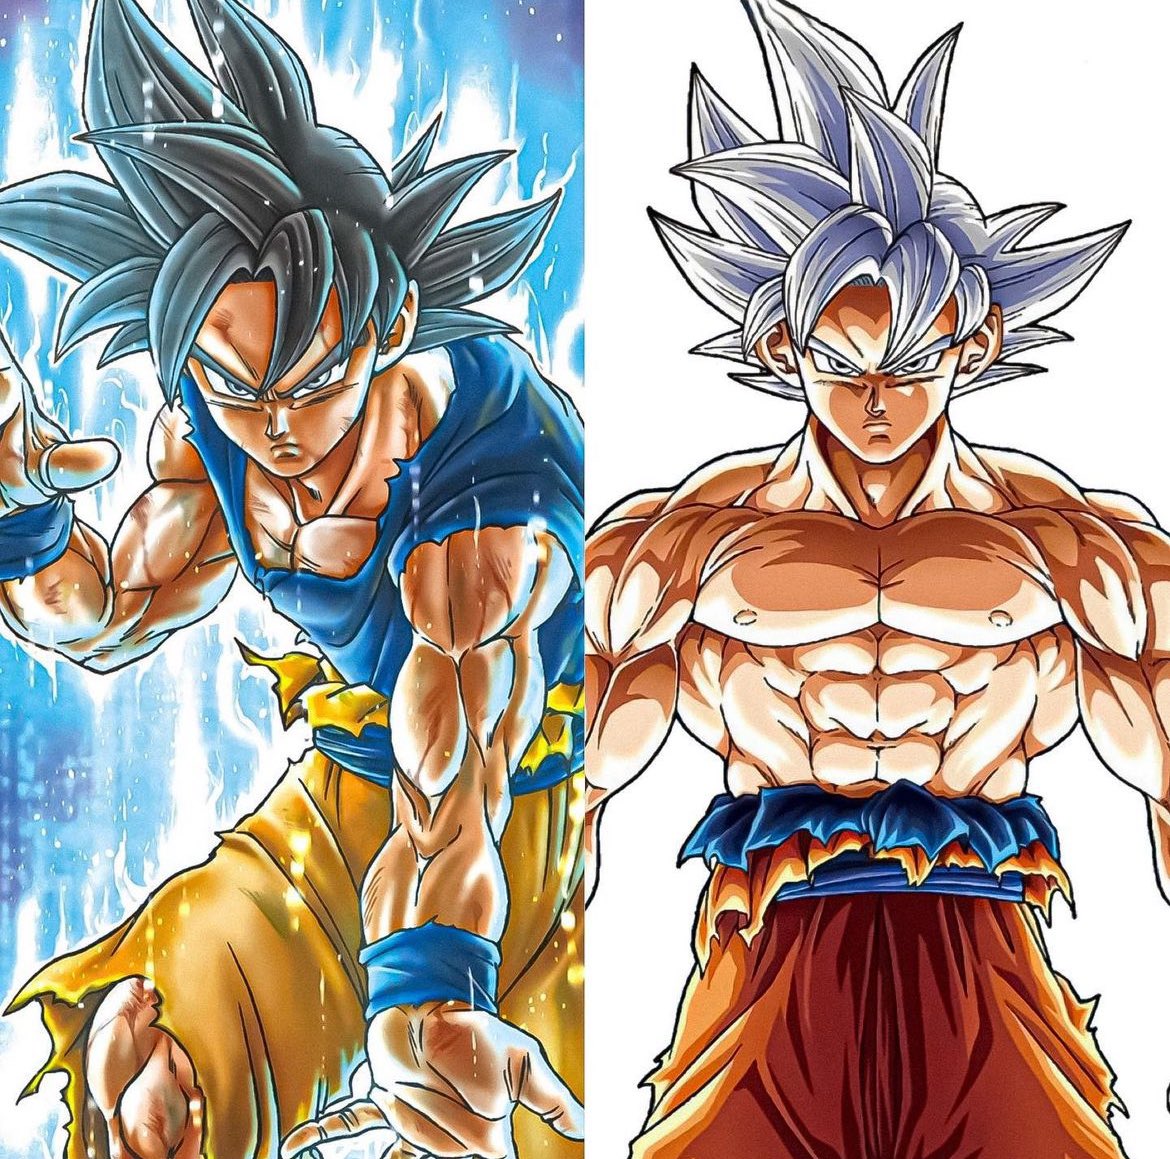 Toyotaro does his thing when he draws Goku 🔥🔥